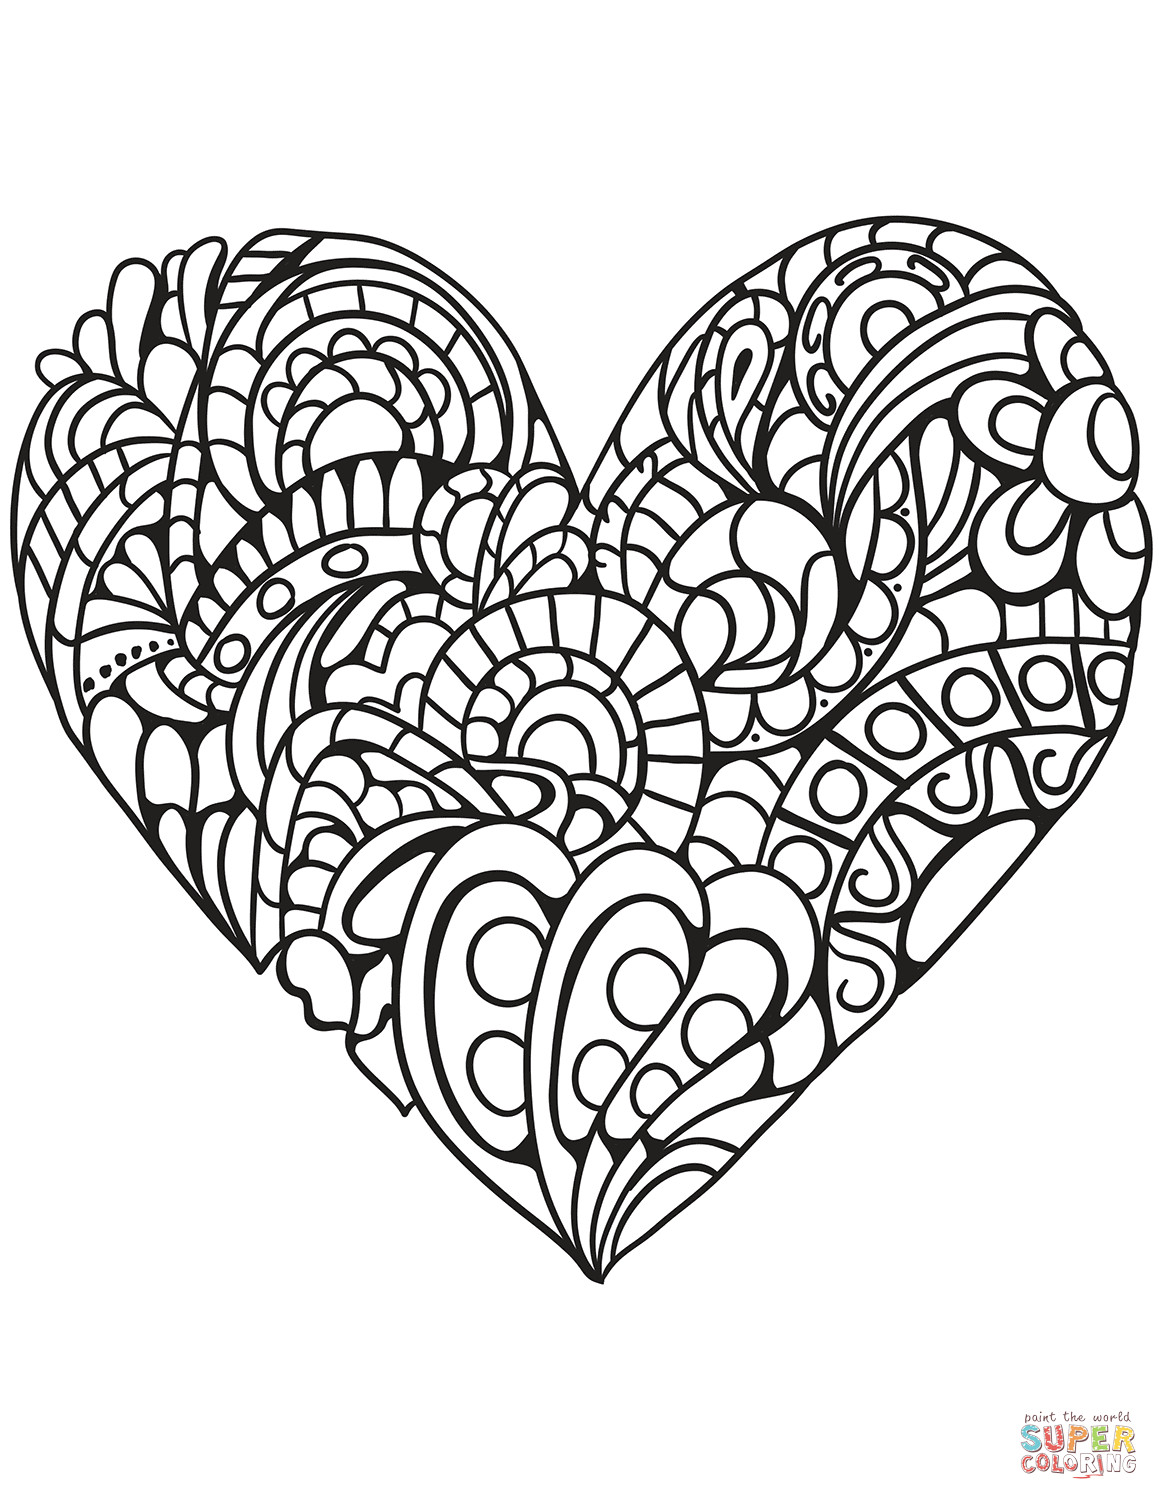 Adult Coloring Pages Heart
 Zentangle Heart coloring page